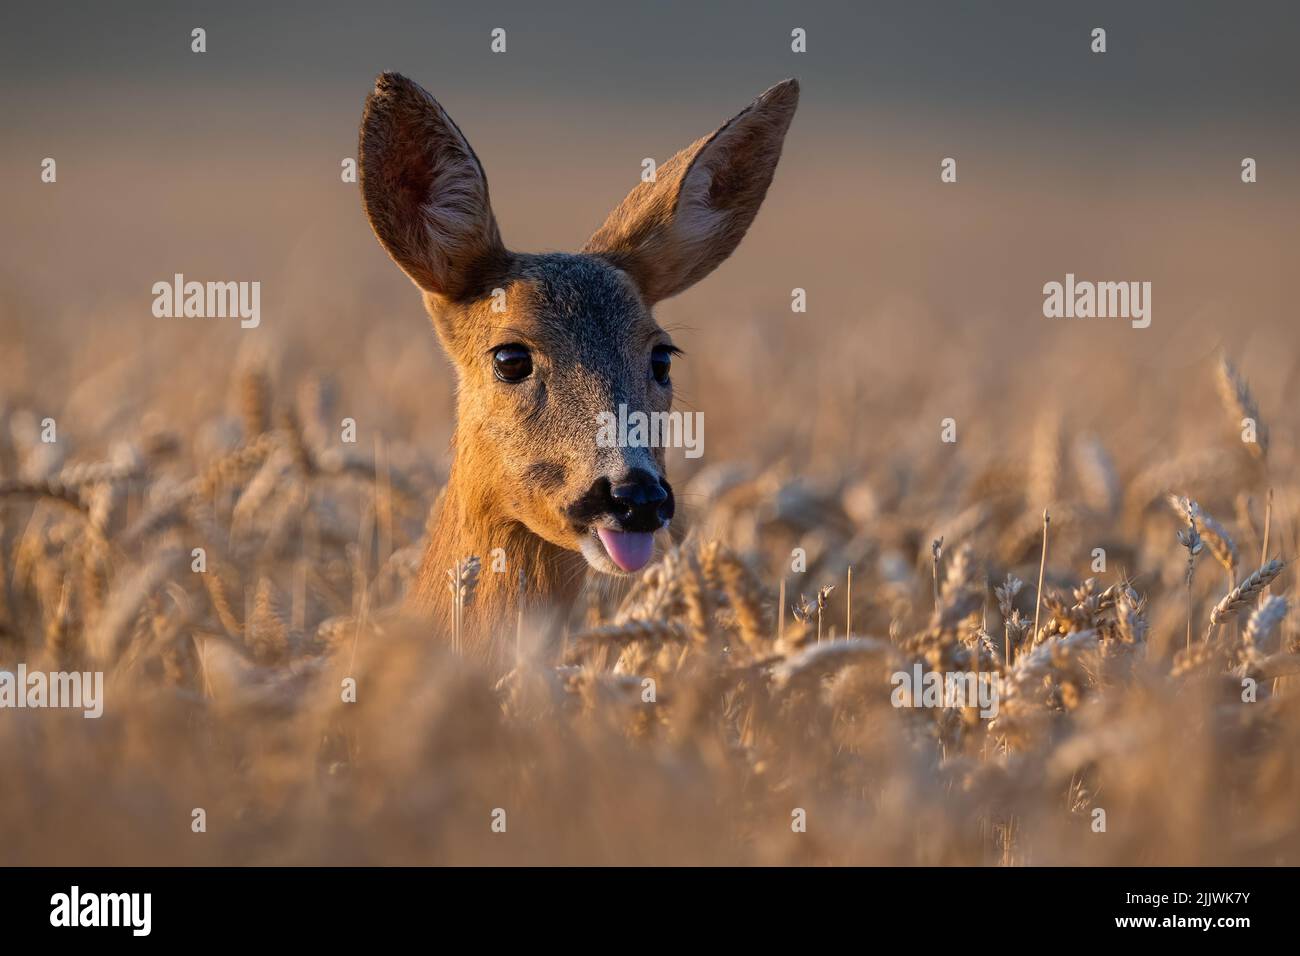 Roe deer tongue sticking out in wheat in close up. Stock Photo